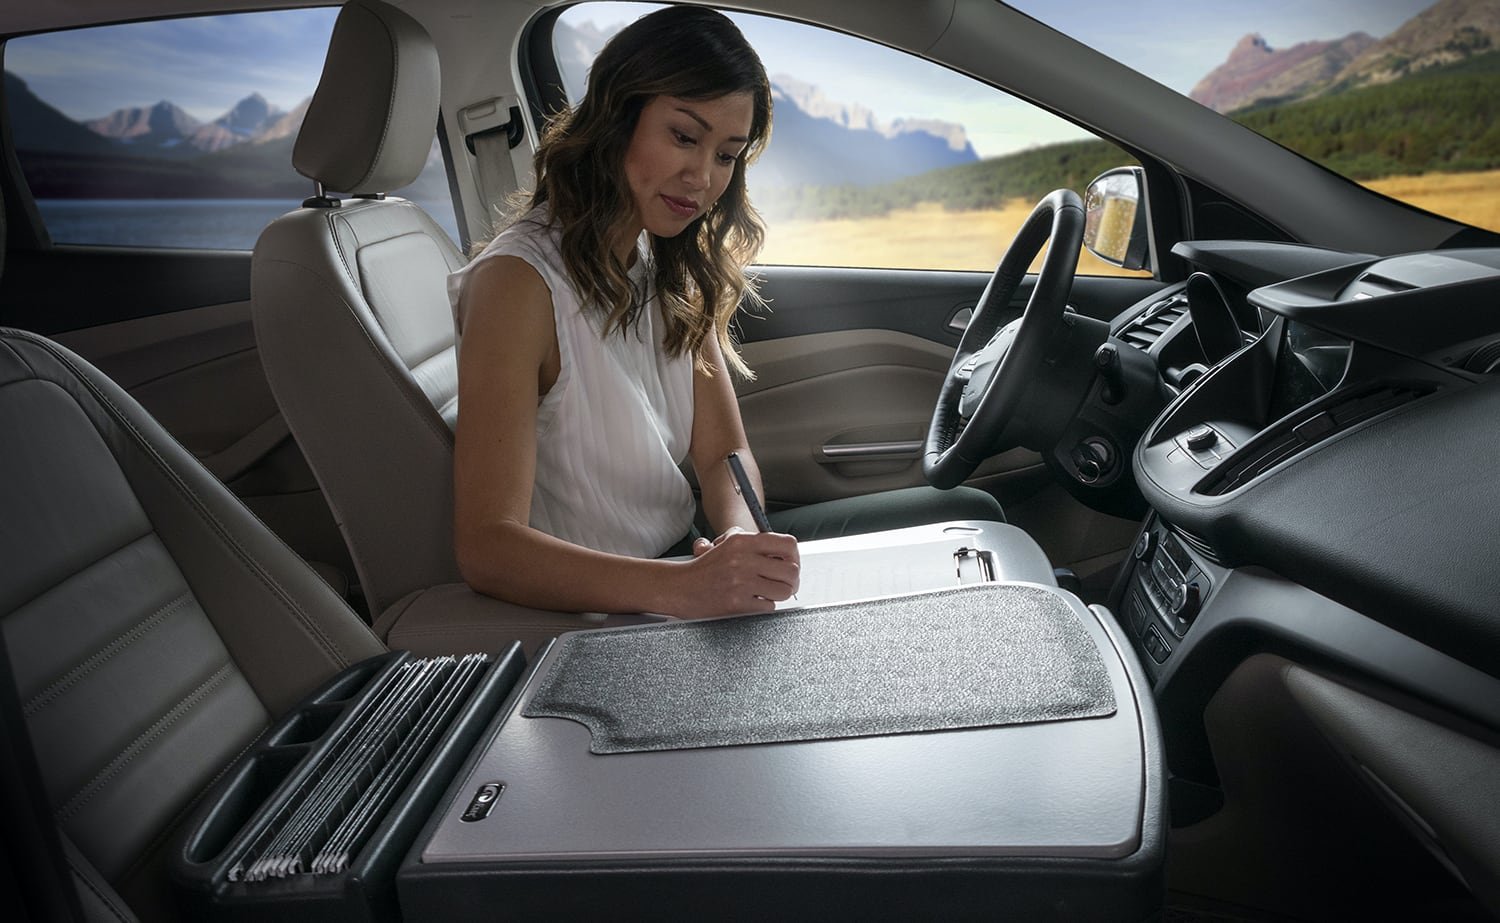 GripMaster by AutoExec Vehicle Desk makes it easy to get work done in your car